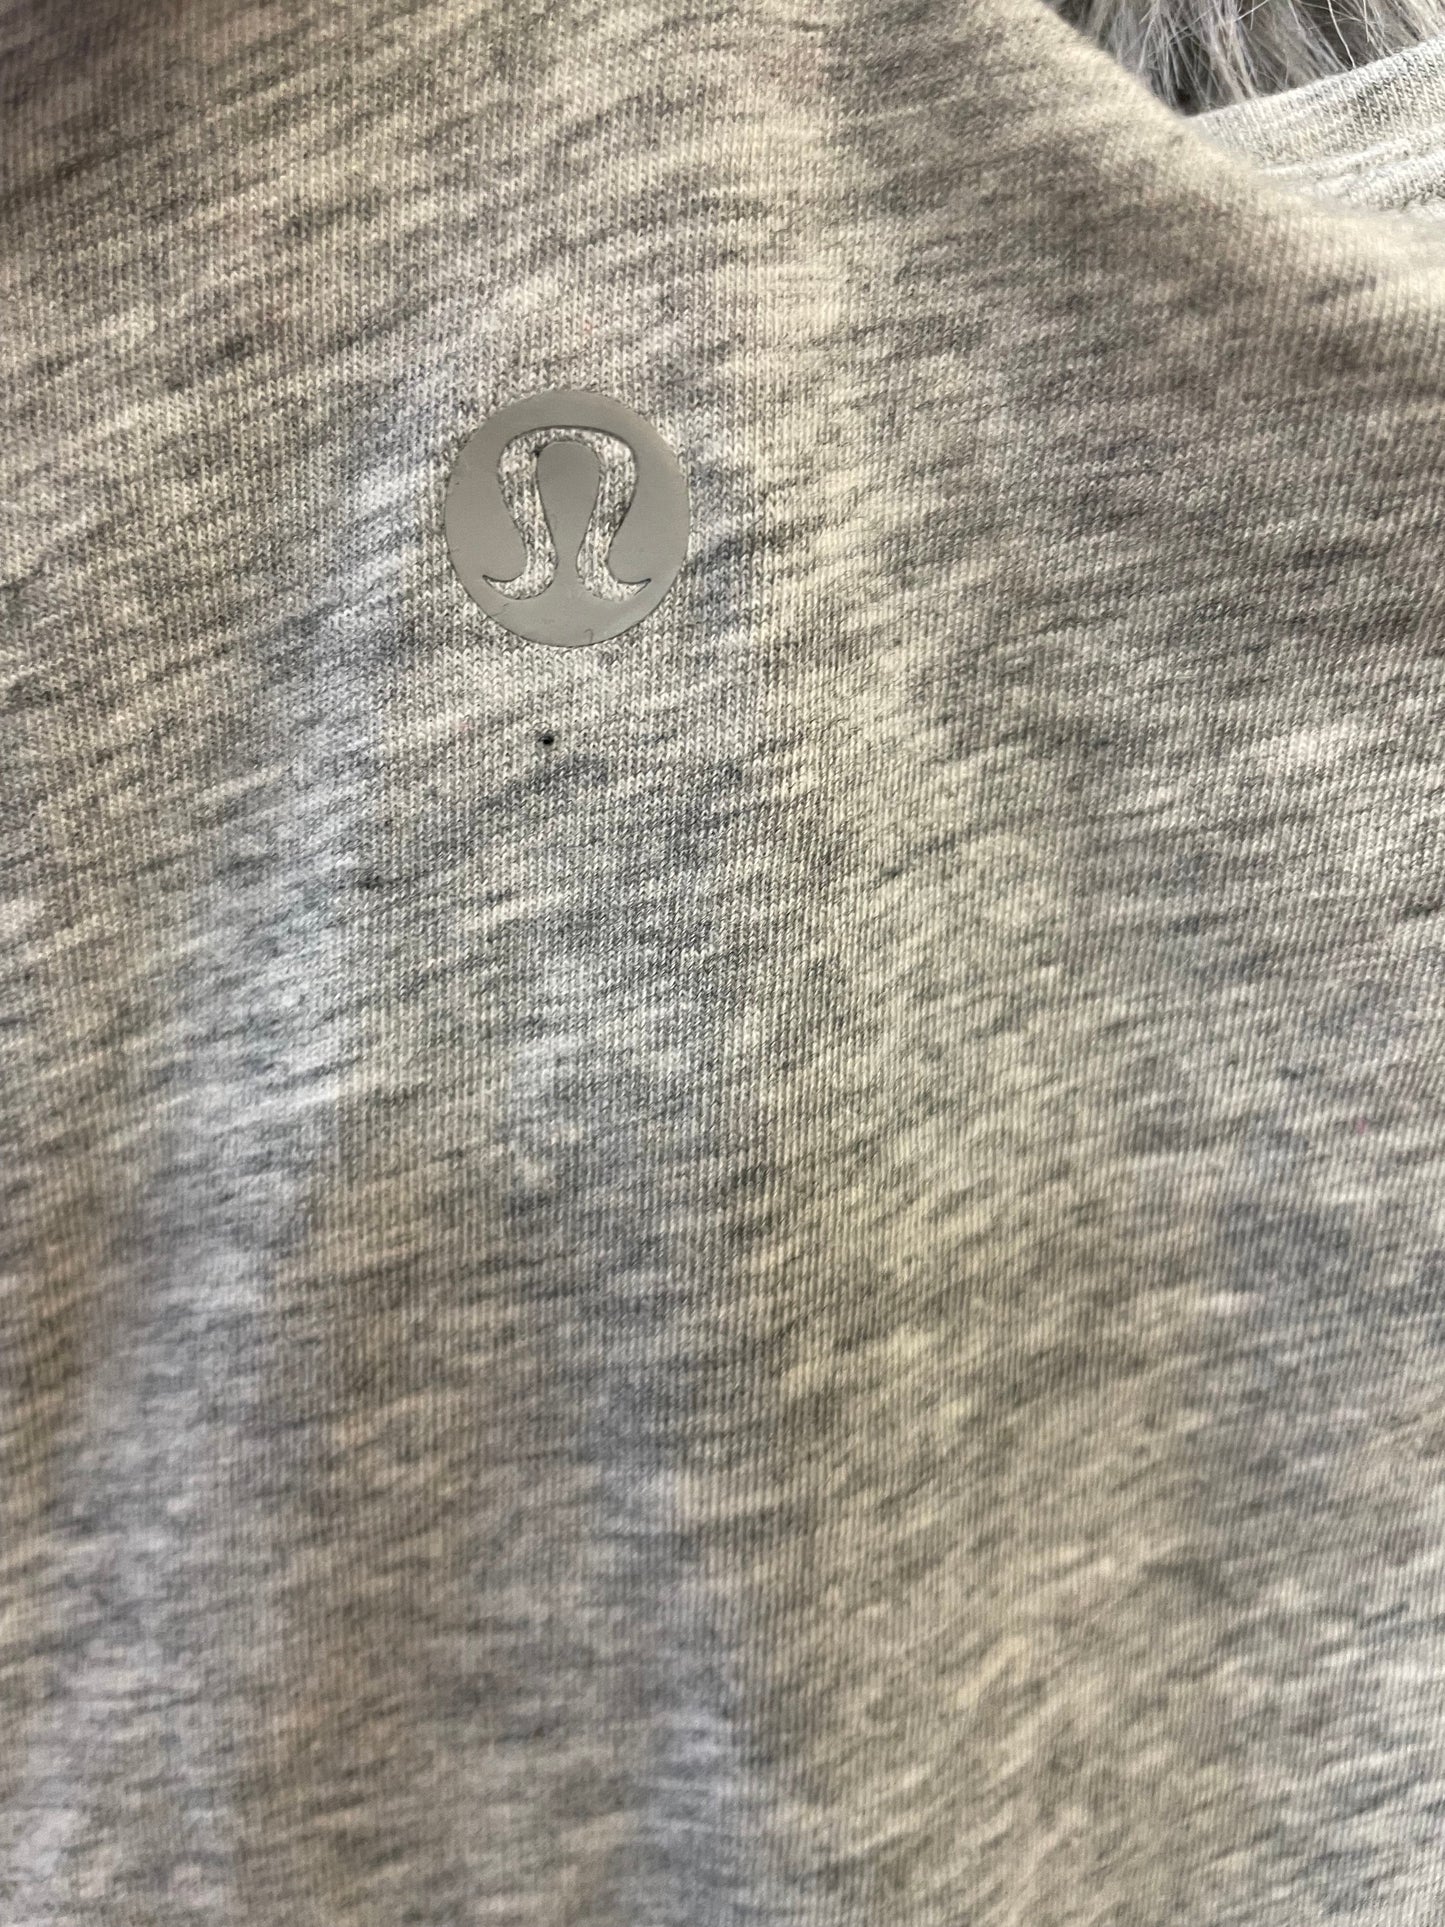 Top Long Sleeve By Lululemon  Size: Xs